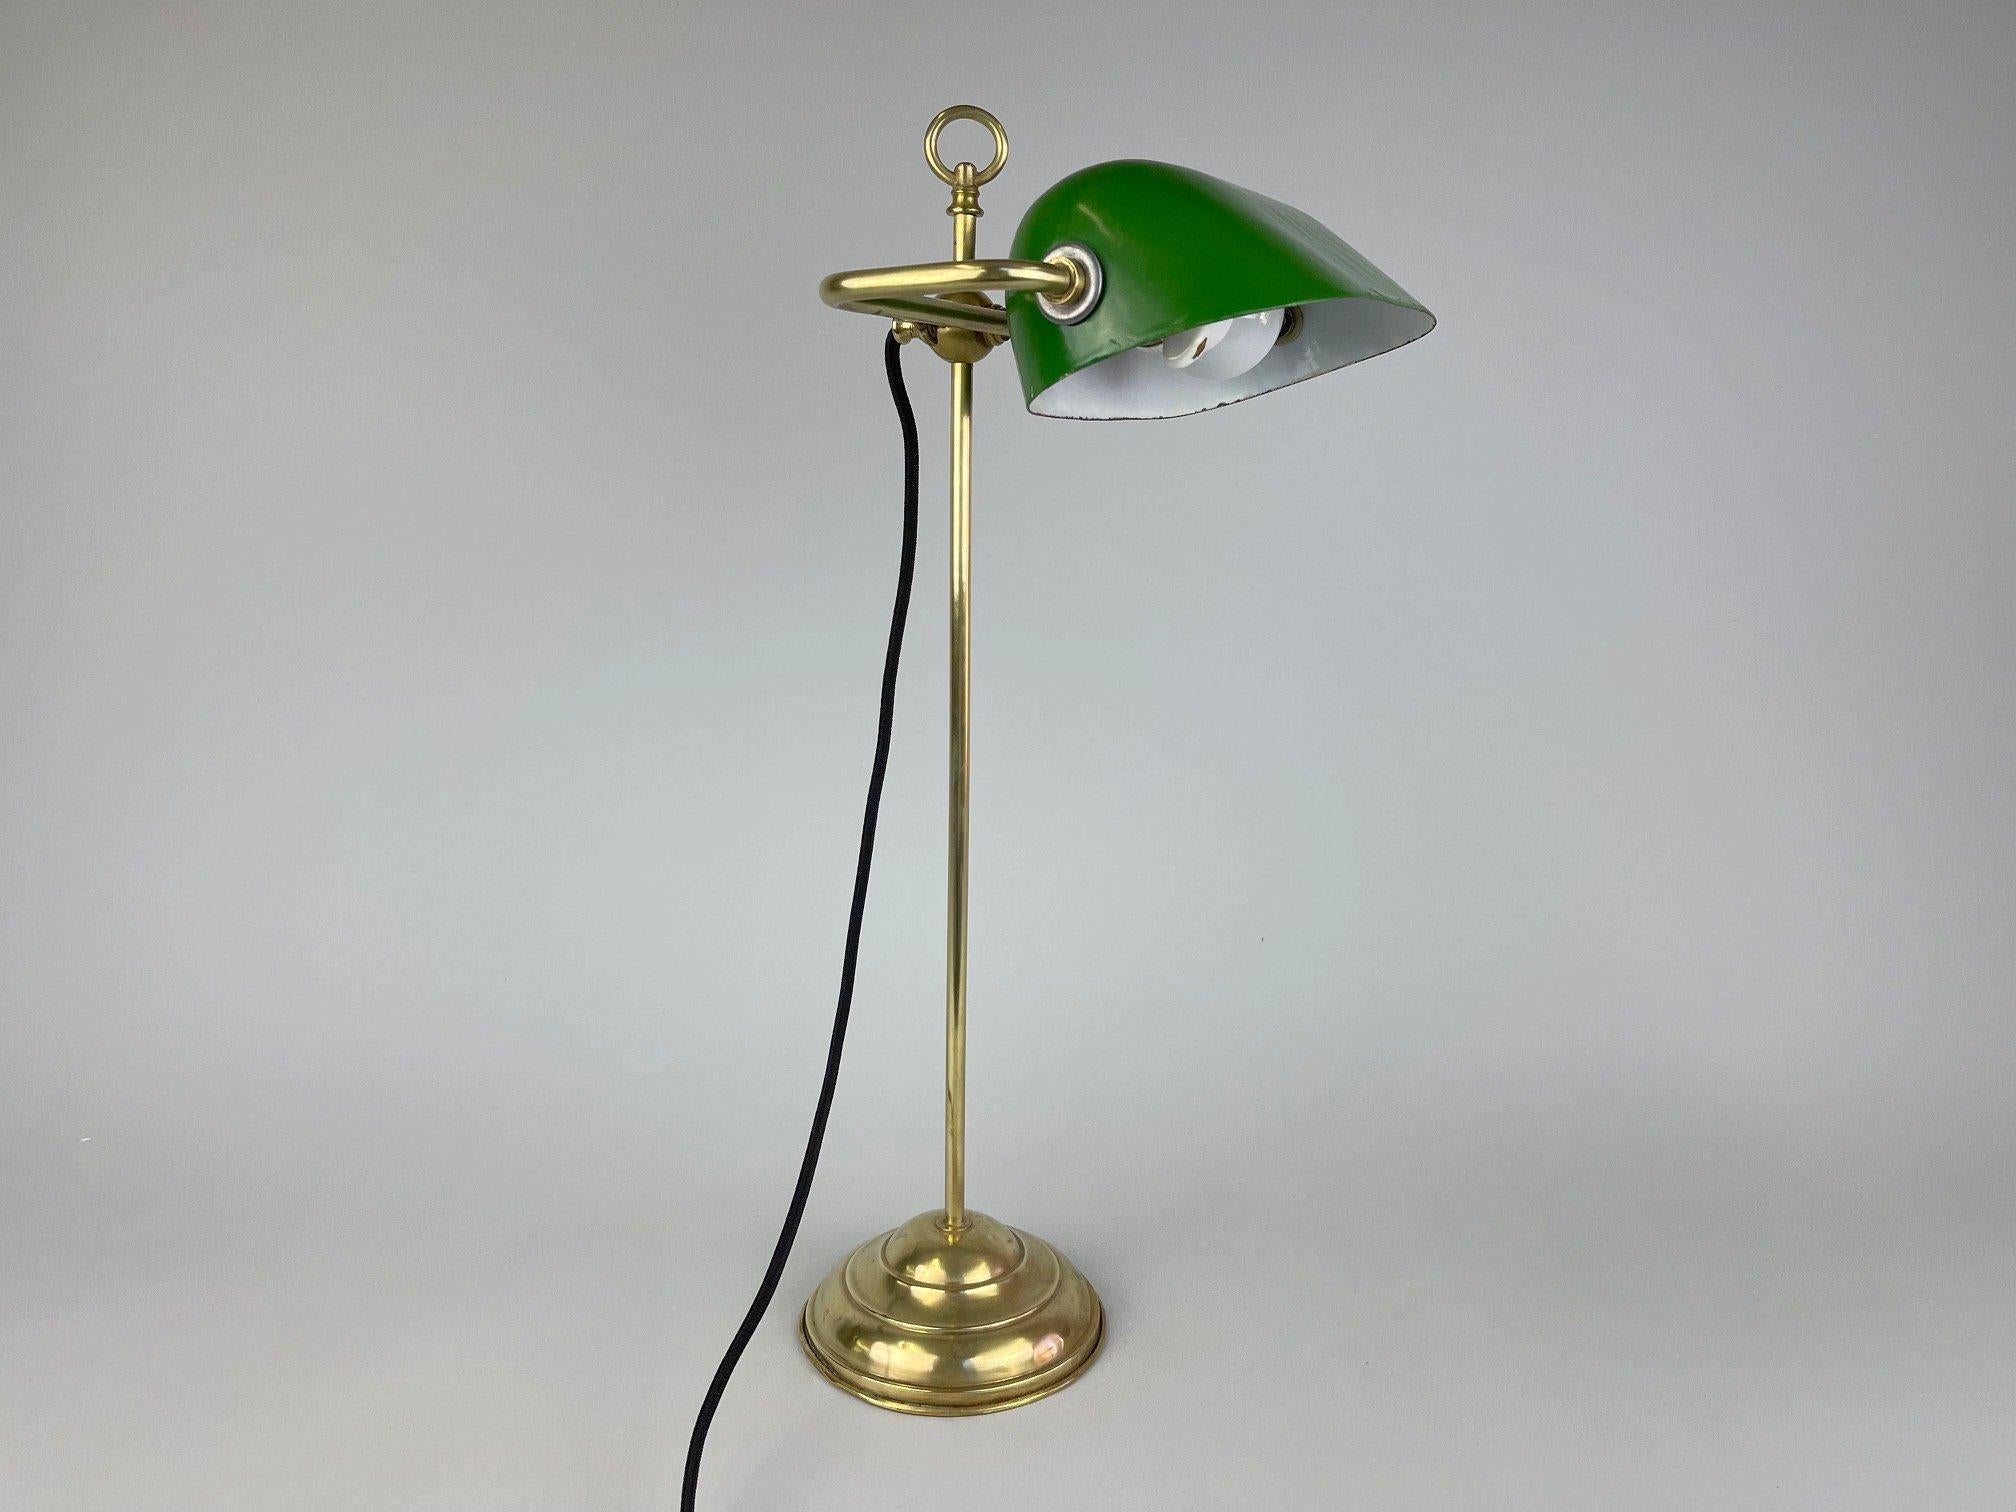 Art deco tall brass table lamp with an original metal shade and original ceramic one-way rotary switch. New wiring, bulb: 1 x E25-E27.